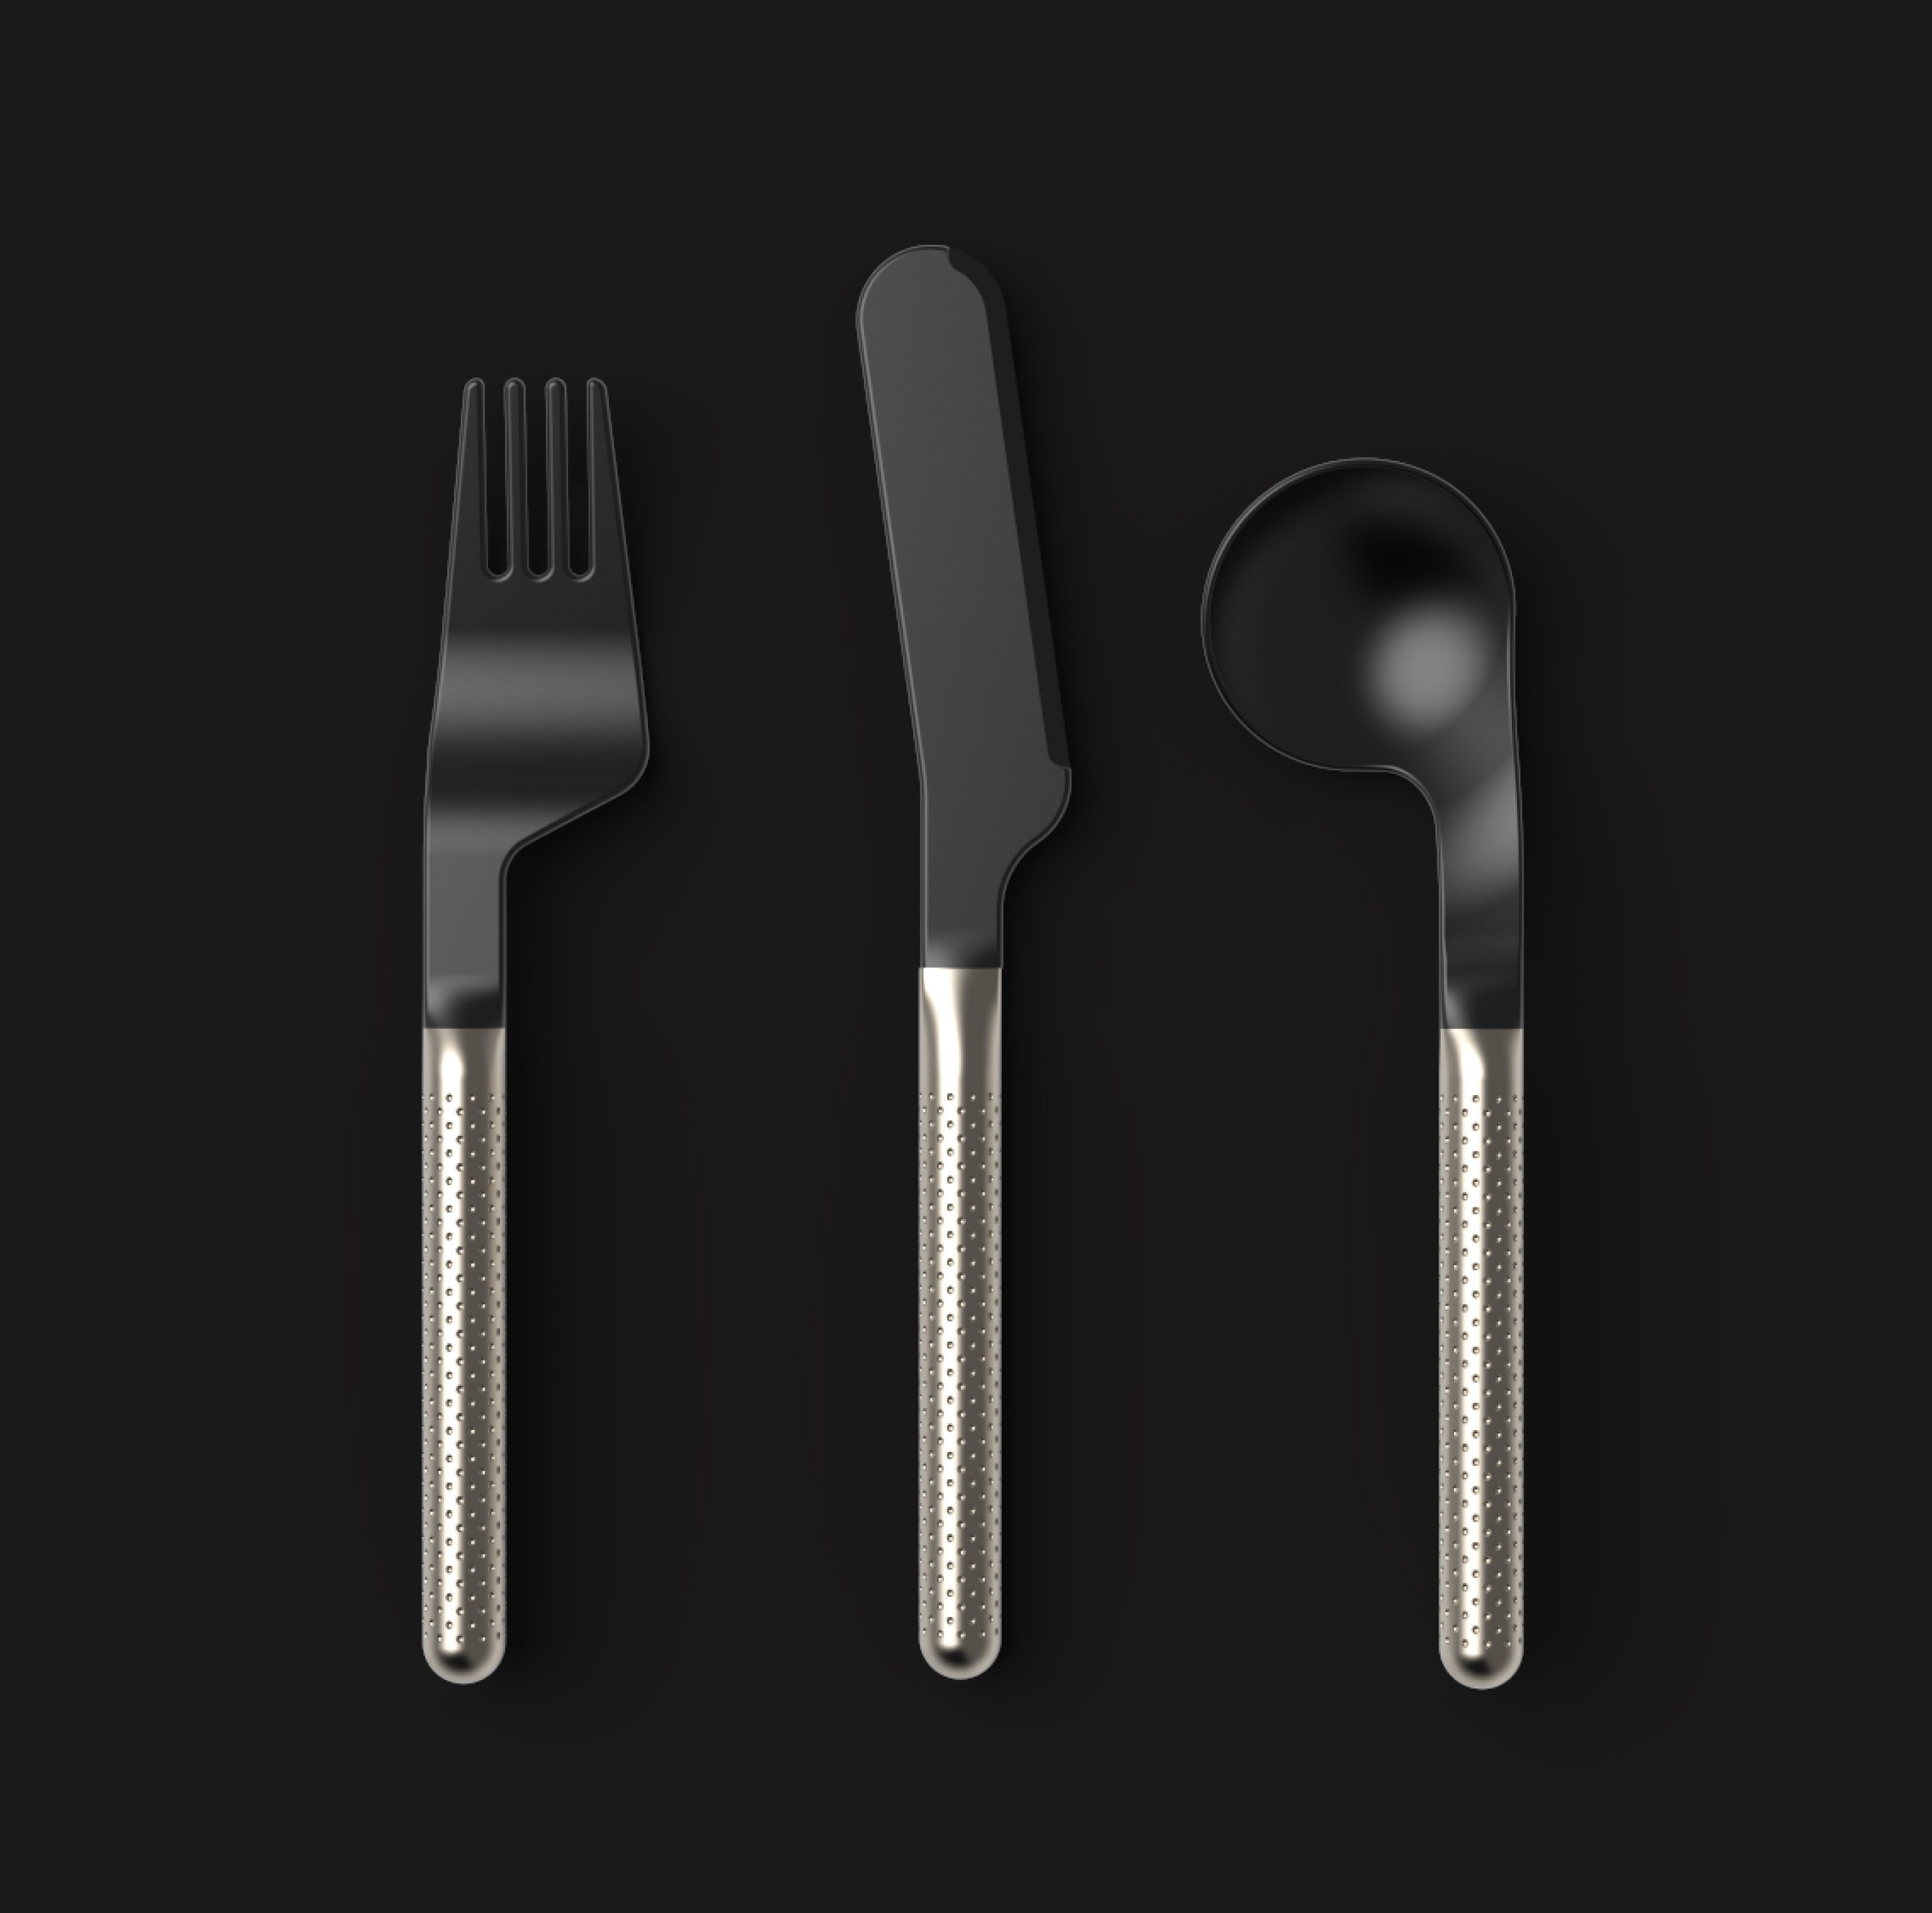 font-a-font-like-cutlery-collection-for-accessibility-and-aesthetics-3 Font: A Font-like Cutlery Collection for Accessibility and Aesthetics